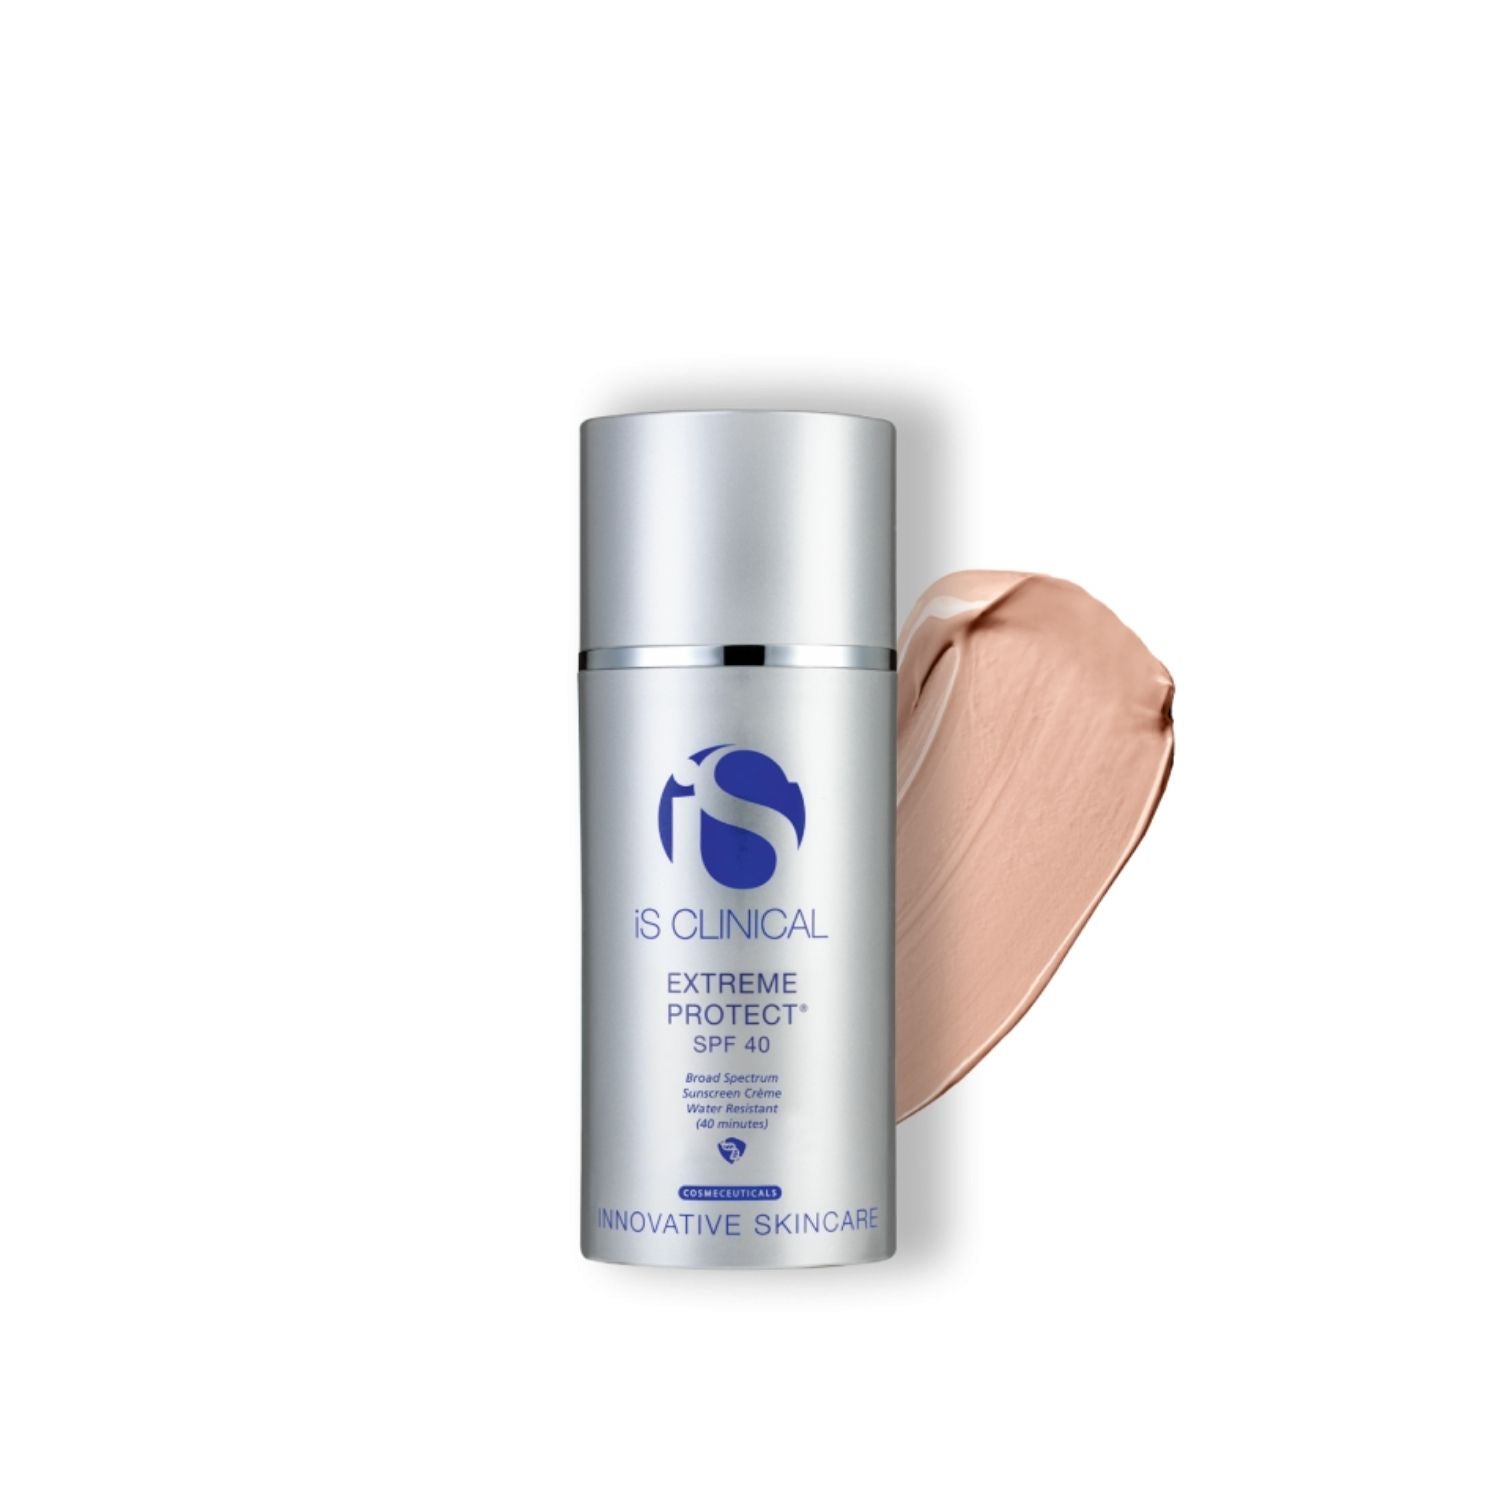 iS Clinical Extreme Protect SPF 40 PerfecTint Beige - Dr. Pen Store - iS Clinical Buy Genuine Dr Pen Products with Trust